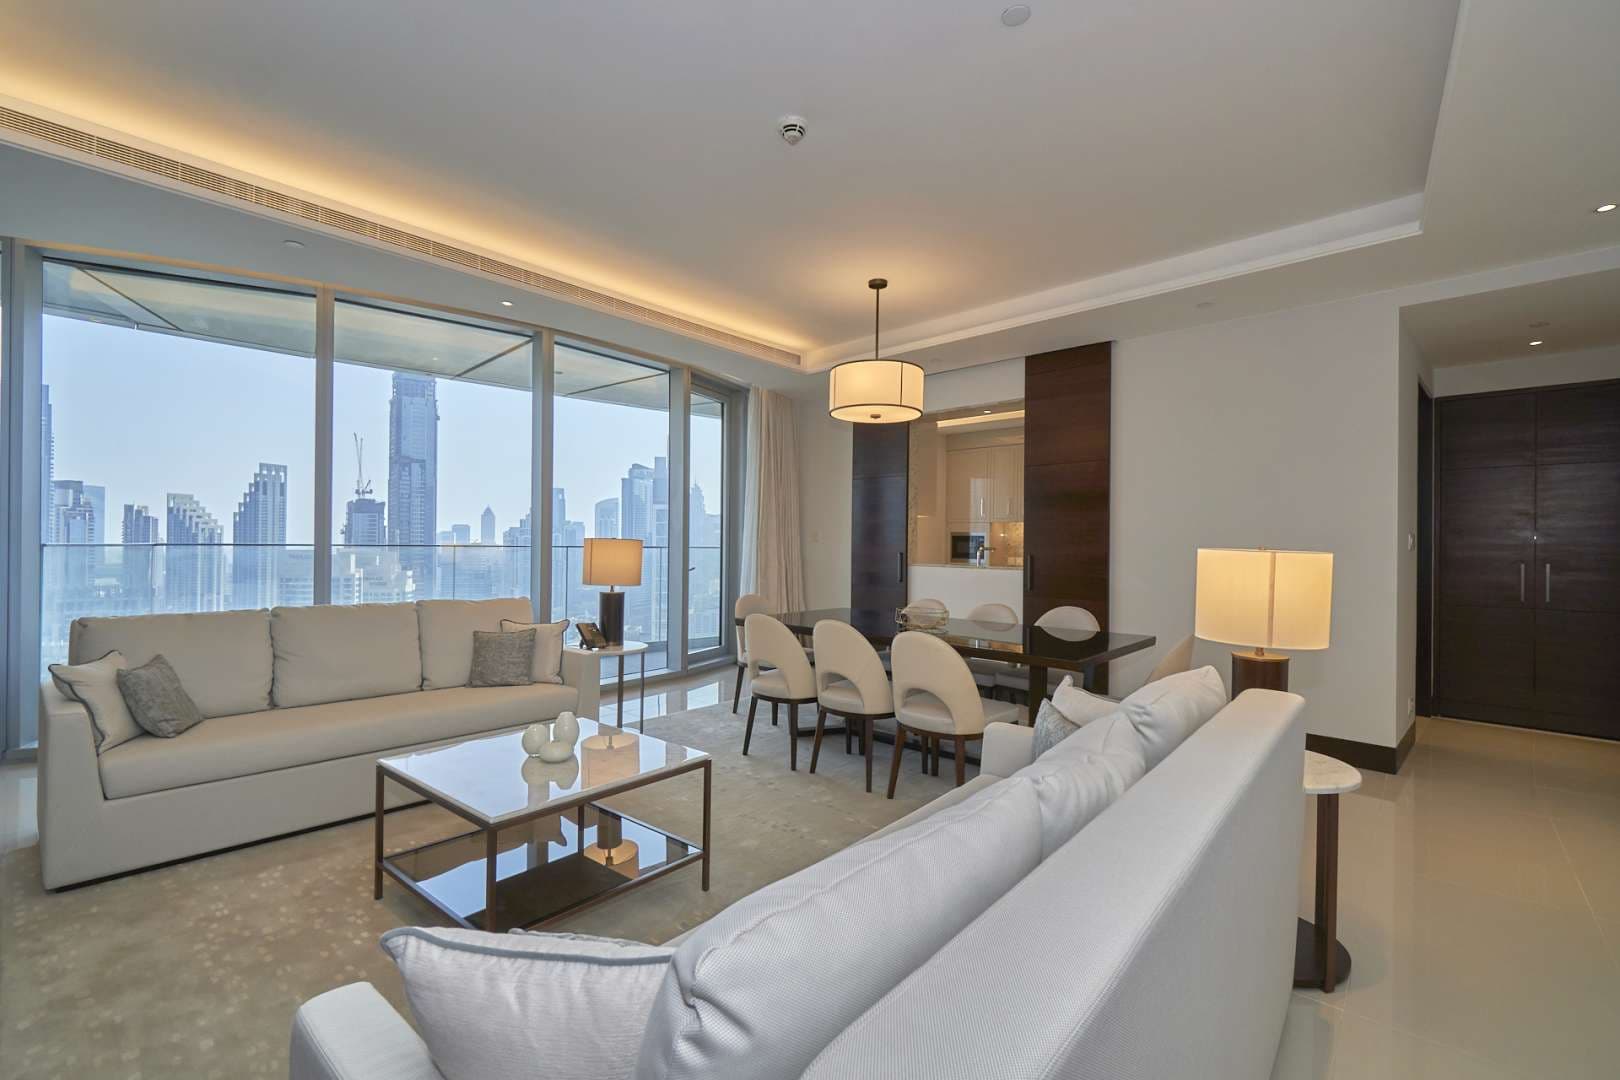 3 Bedroom Apartment For Sale The Address Sky View Towers Lp09314 25e7a9ba80c13a00.jpg